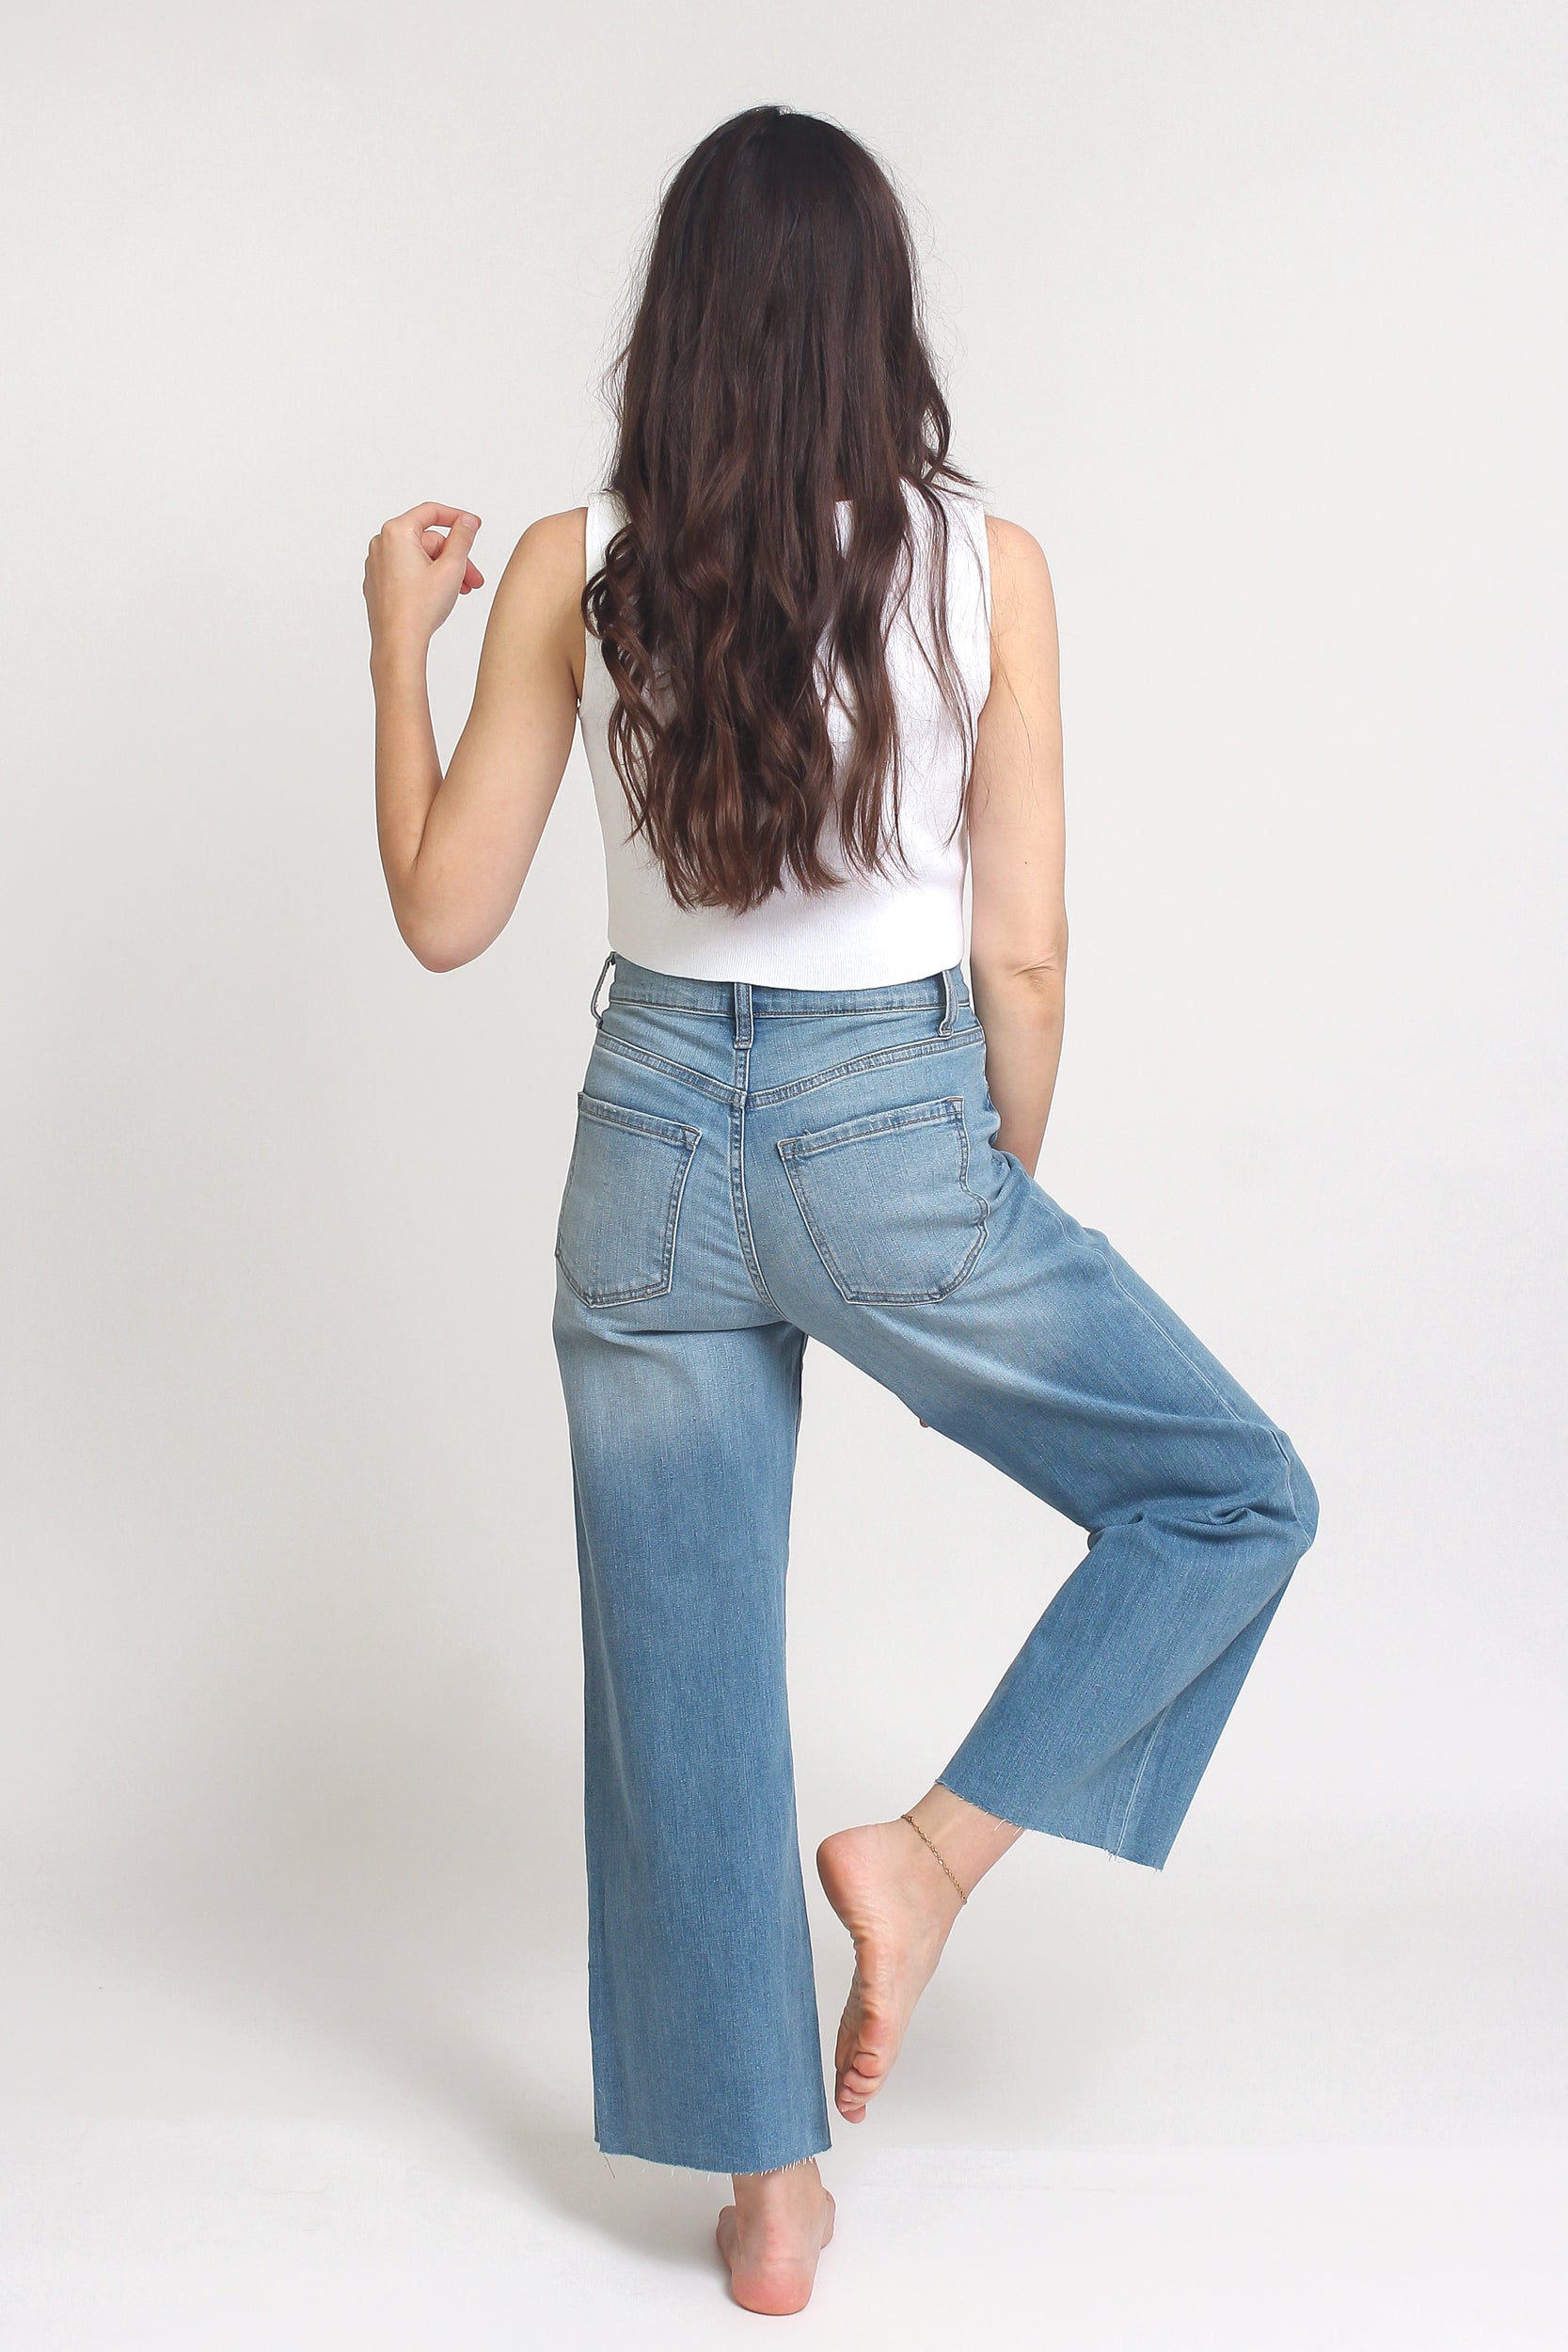 High waist, cut off cropped jeans, in Med/Light. Image 4